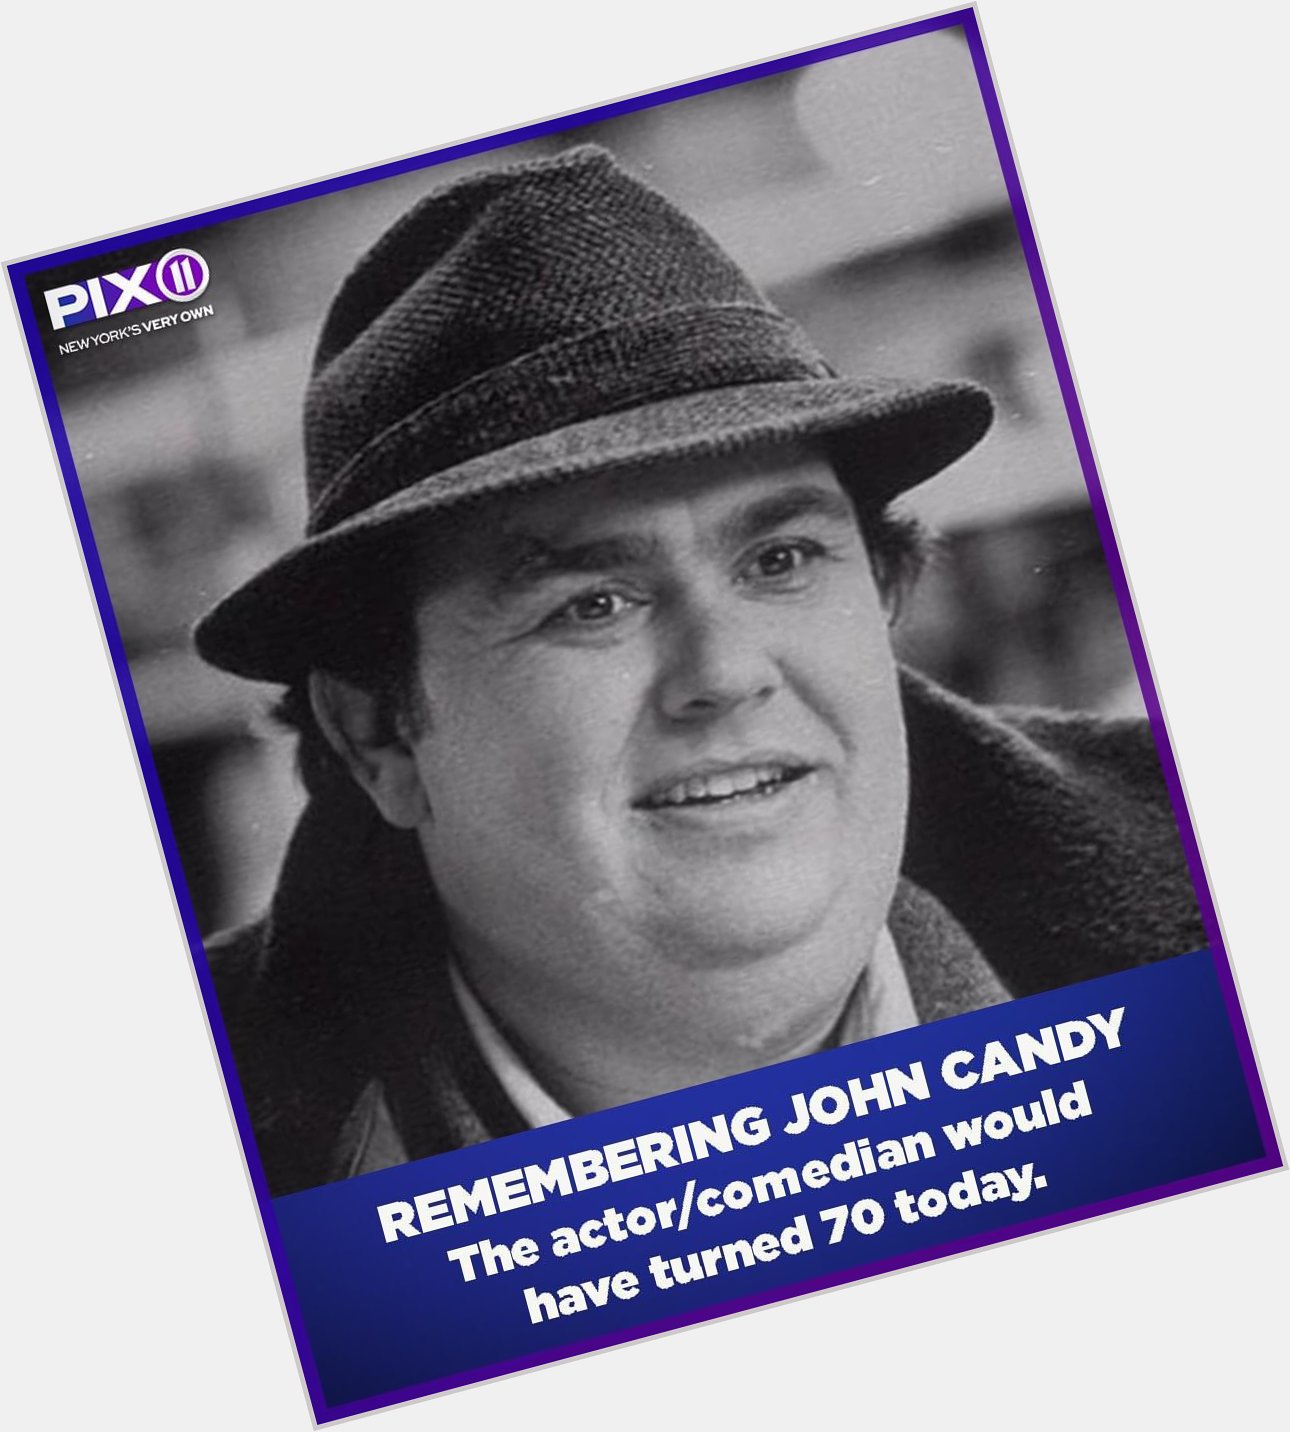 Happy birthday In heaven John Candy. Thank you for your influence and the laughter. 